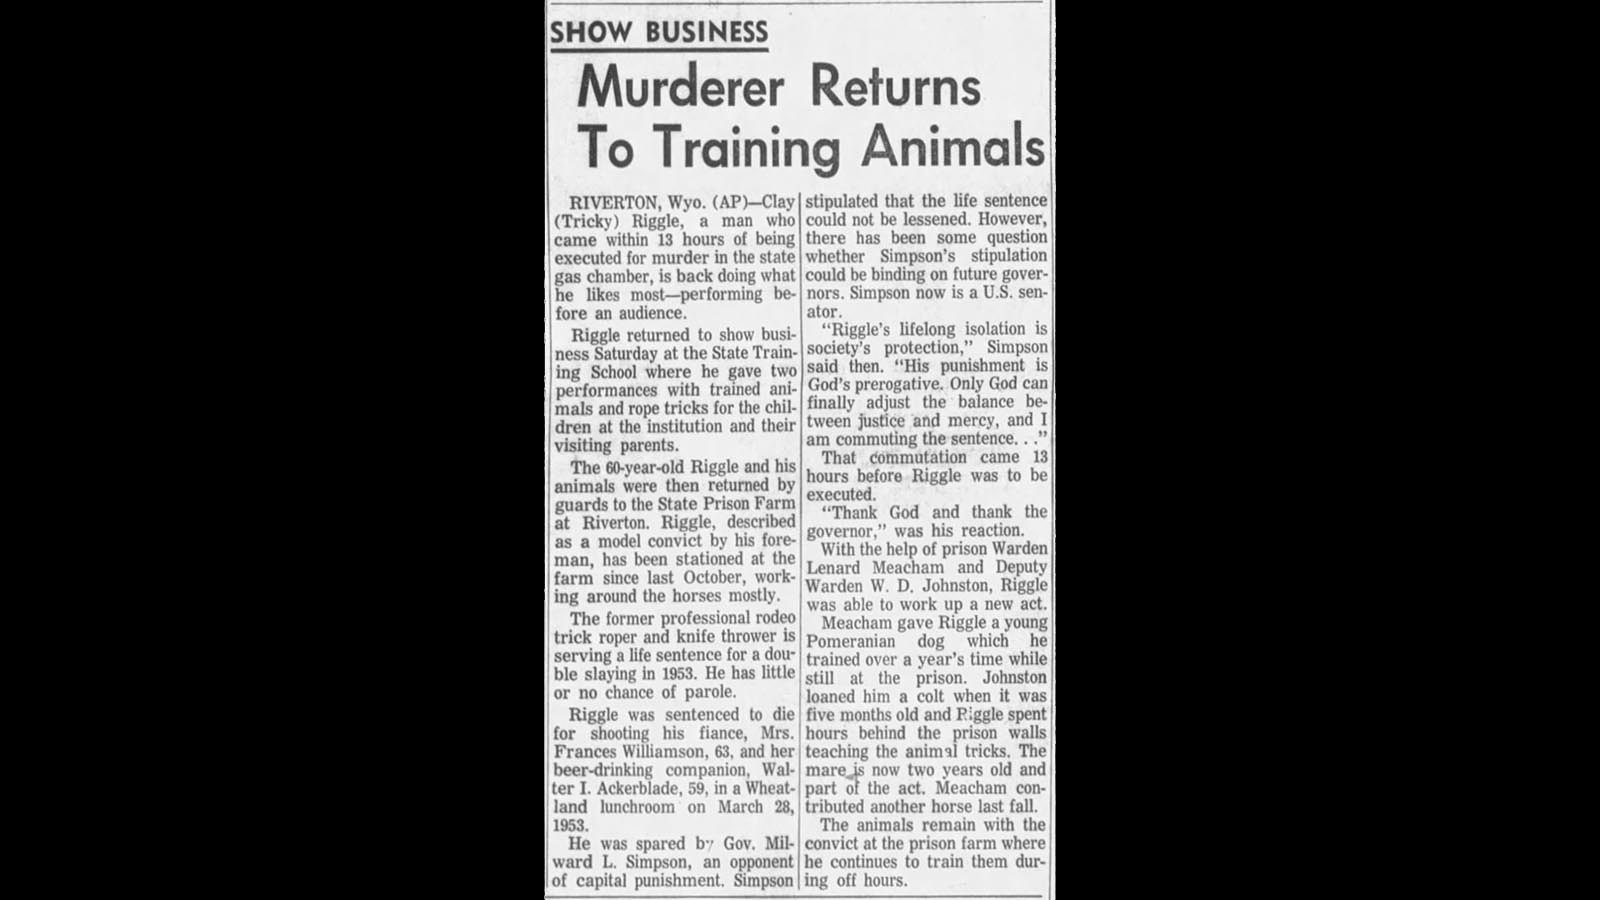 A report in the Billings Gazette on how Tricky Riggle was allowed to have animals in prison.